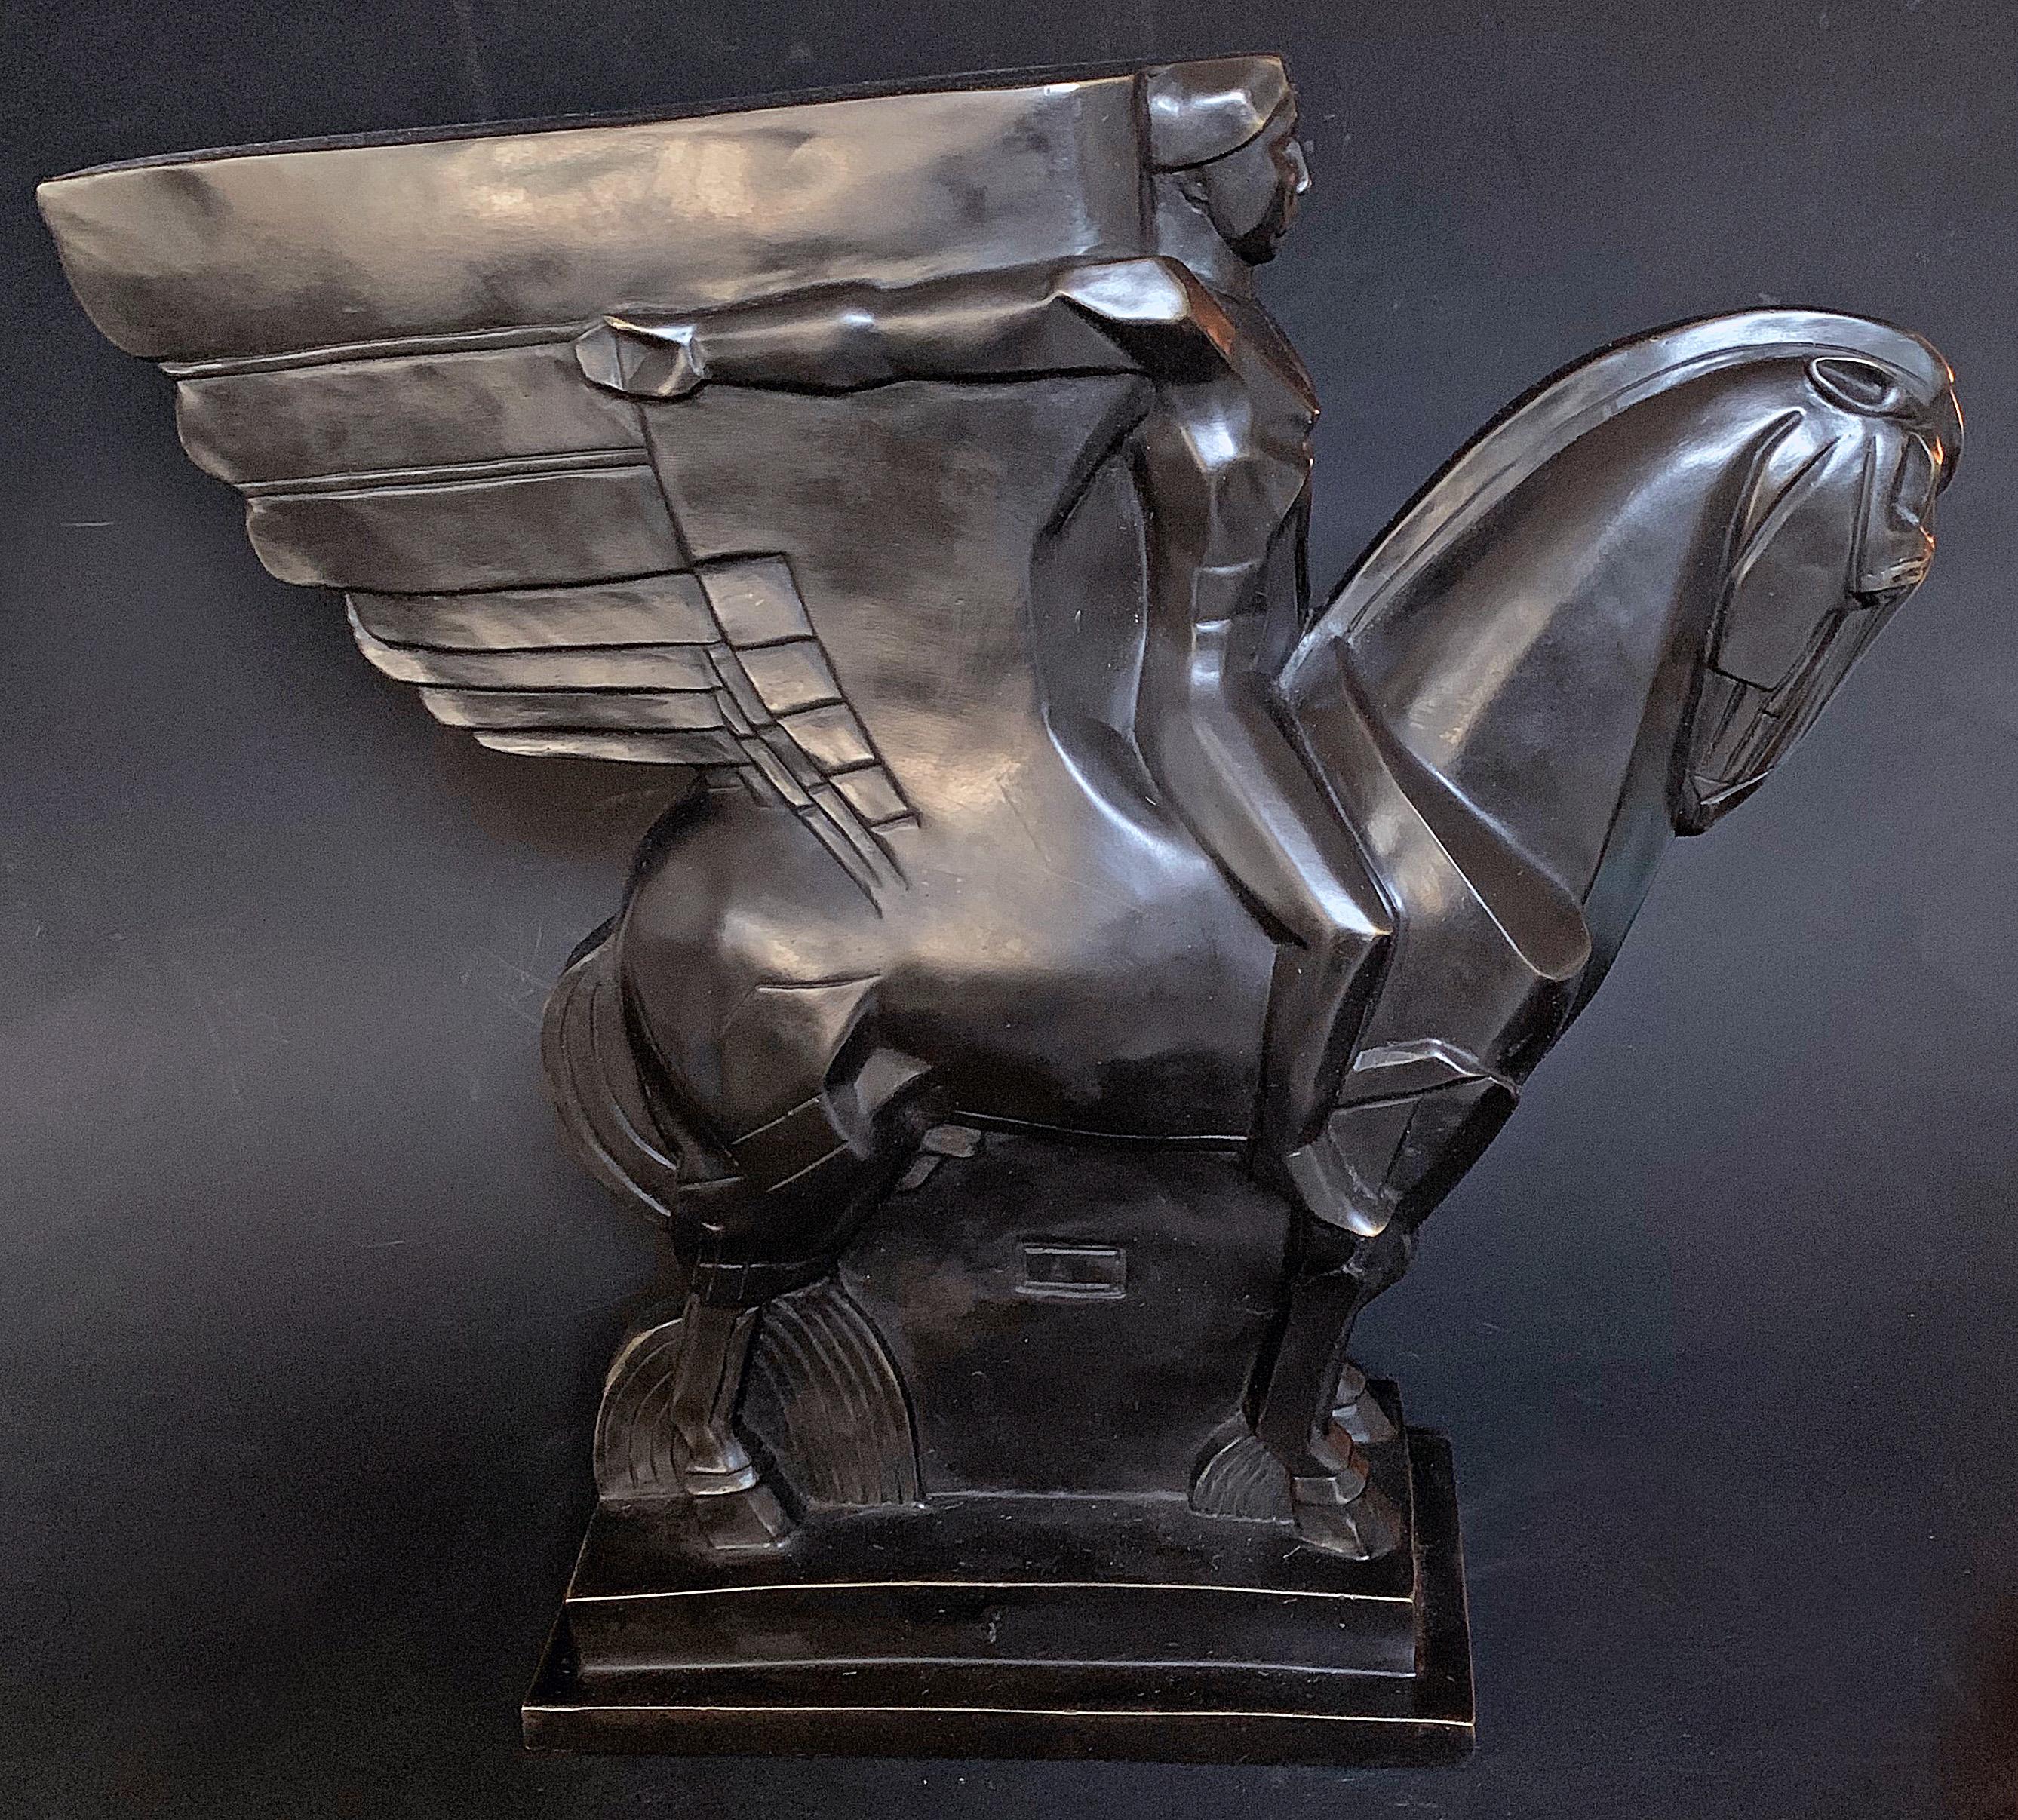 In our opinion, the Monument to Walt Whitman that John Storrs proposed in 1920, although never cast in full size, was one of the greatest Art Deco sculptures of the 1920s. This large, beautifully-detailed example is considered 